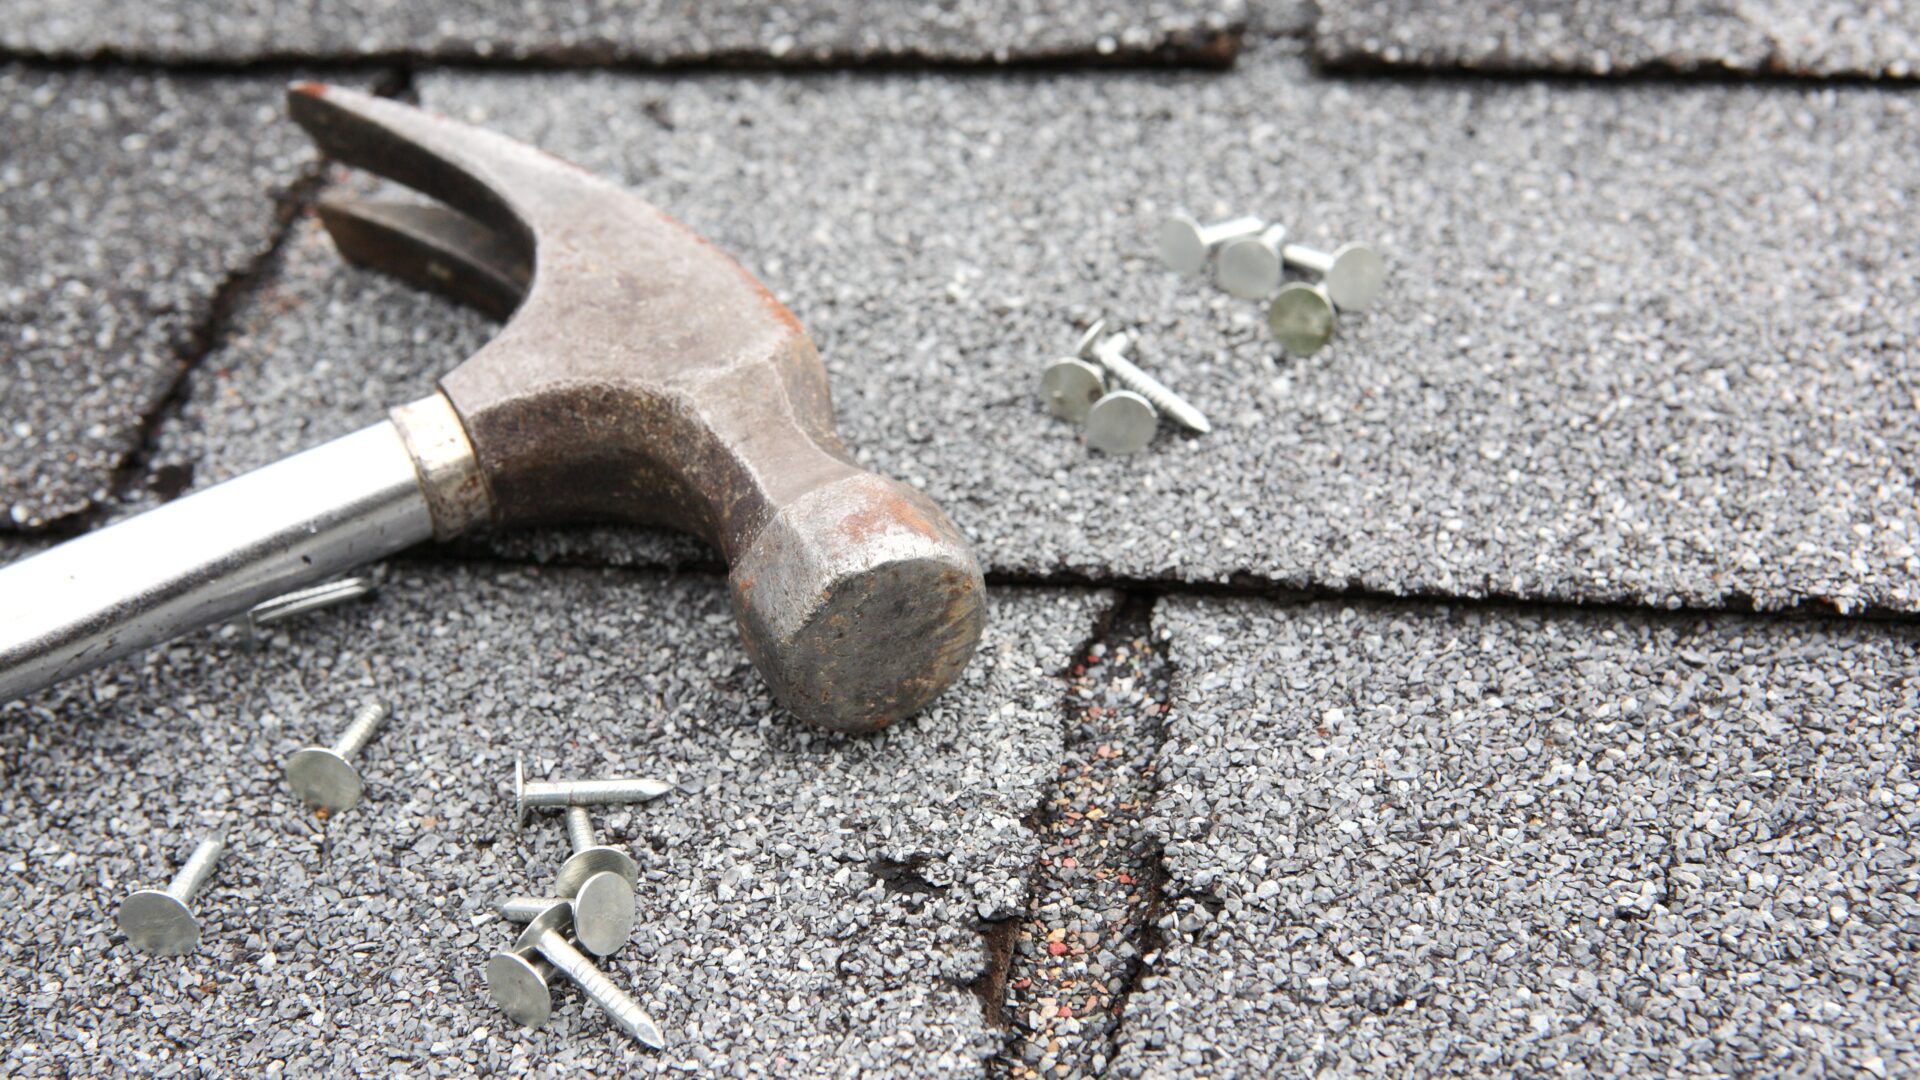 A hammer and roofing nails laying on a shingle roof